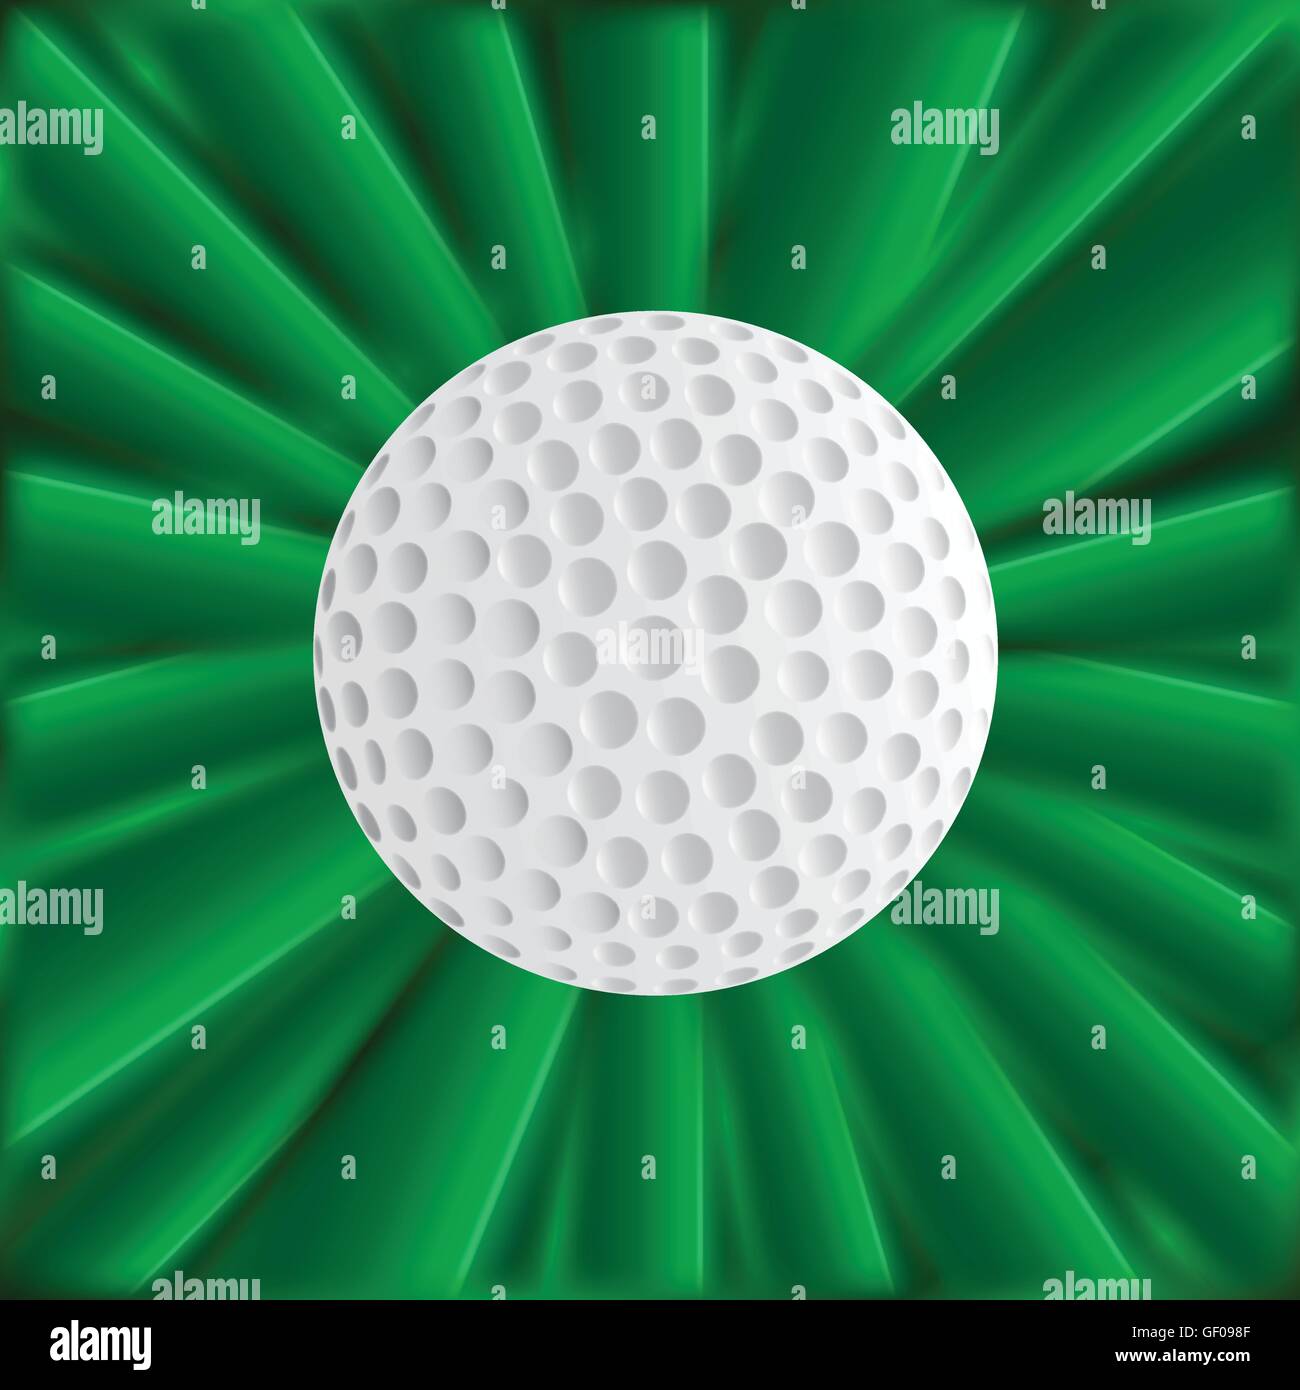 A typical golfball over a green material background Stock Vector